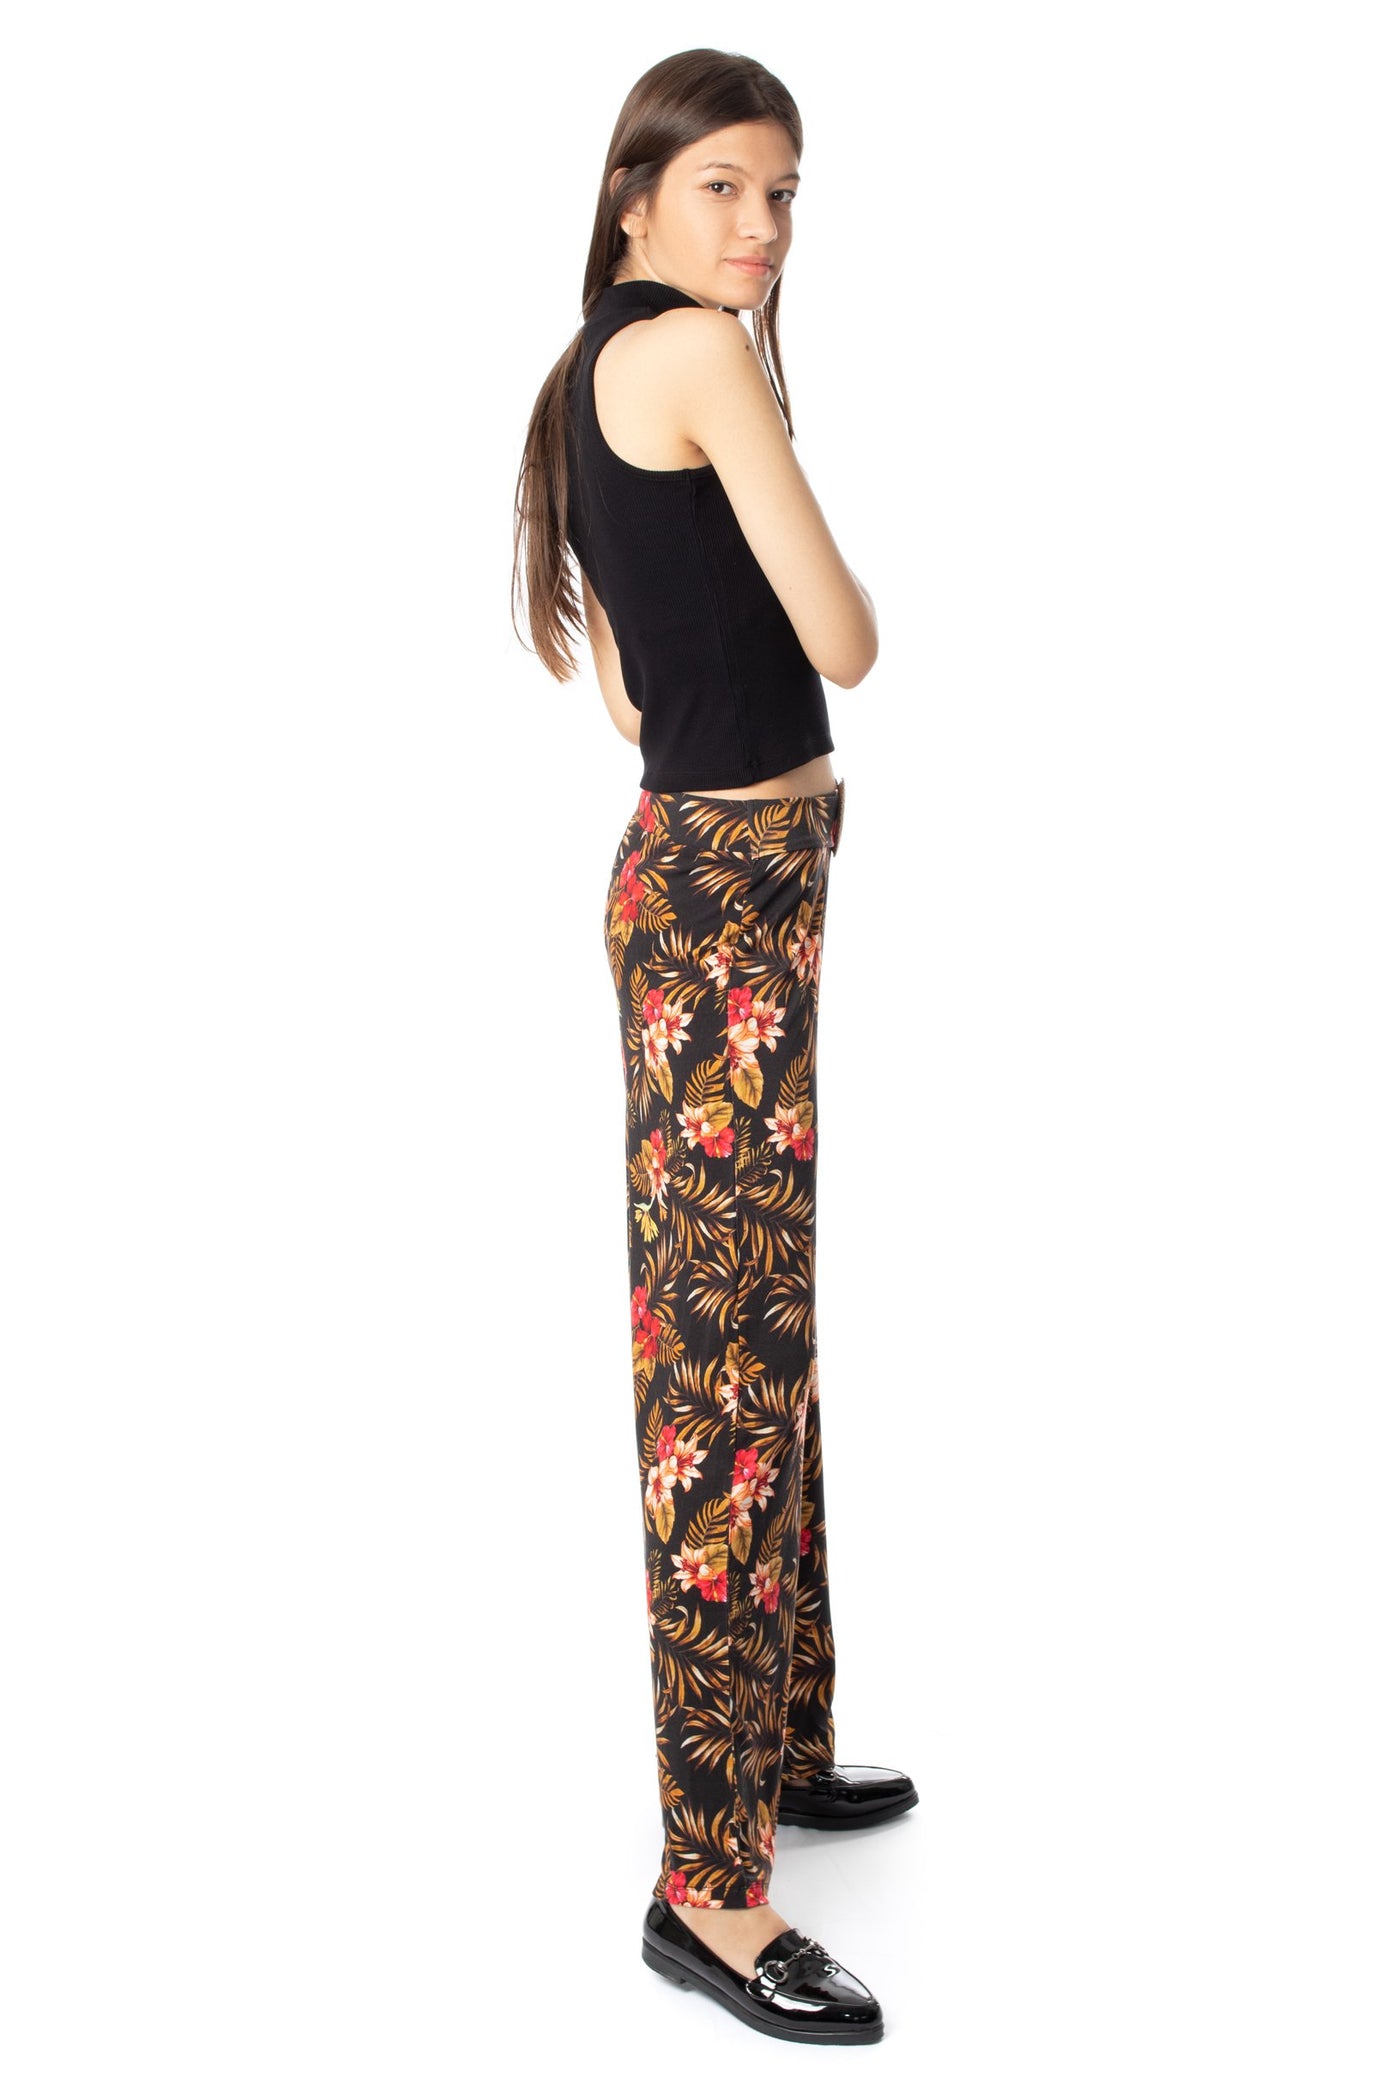 chassca floral printed wide leg pant - Breakmood